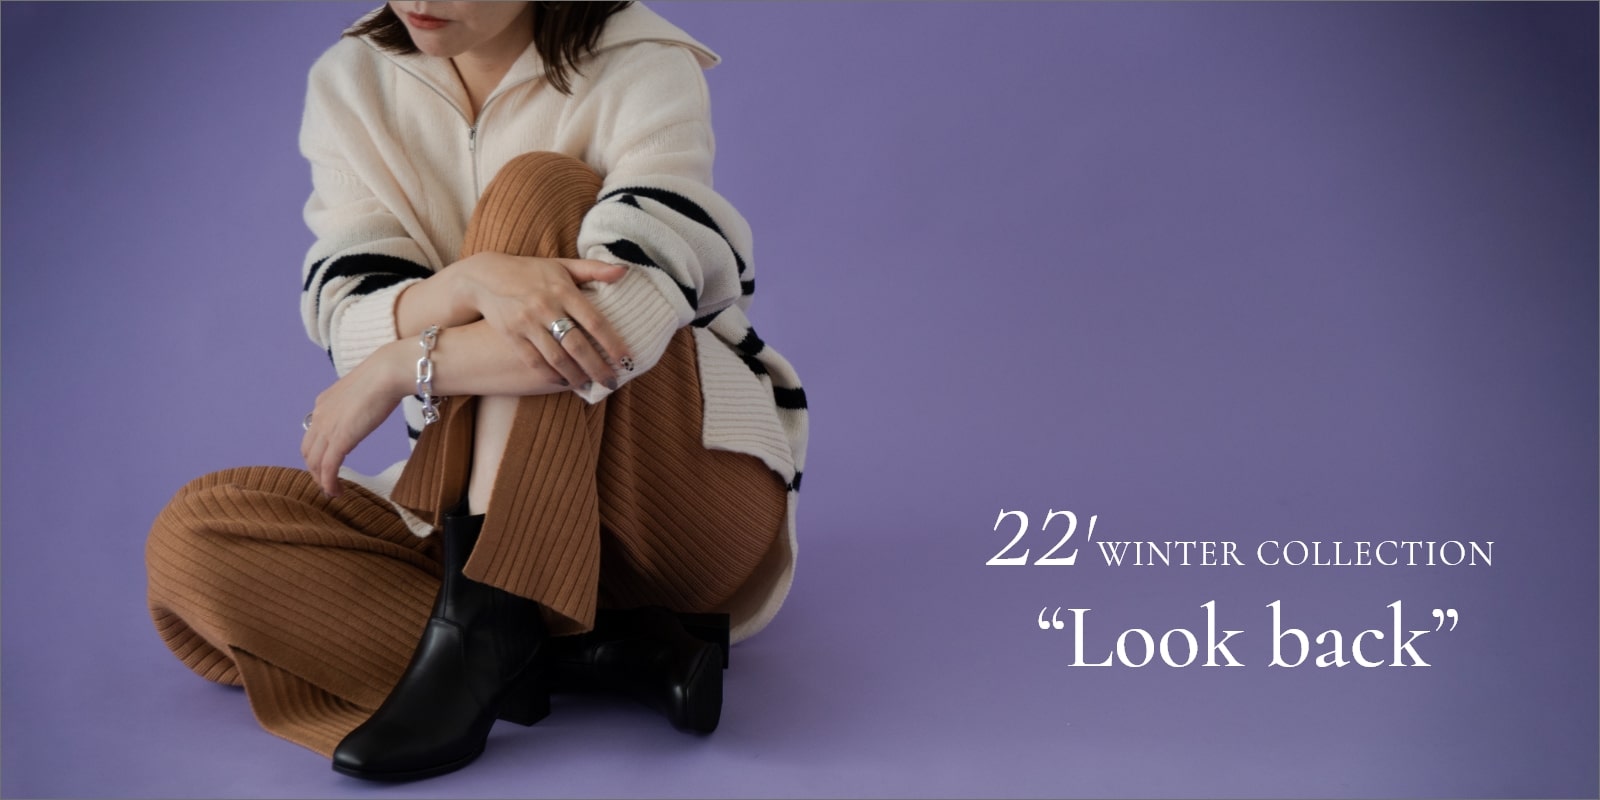 22' WINTER COLLECTION “Look back”